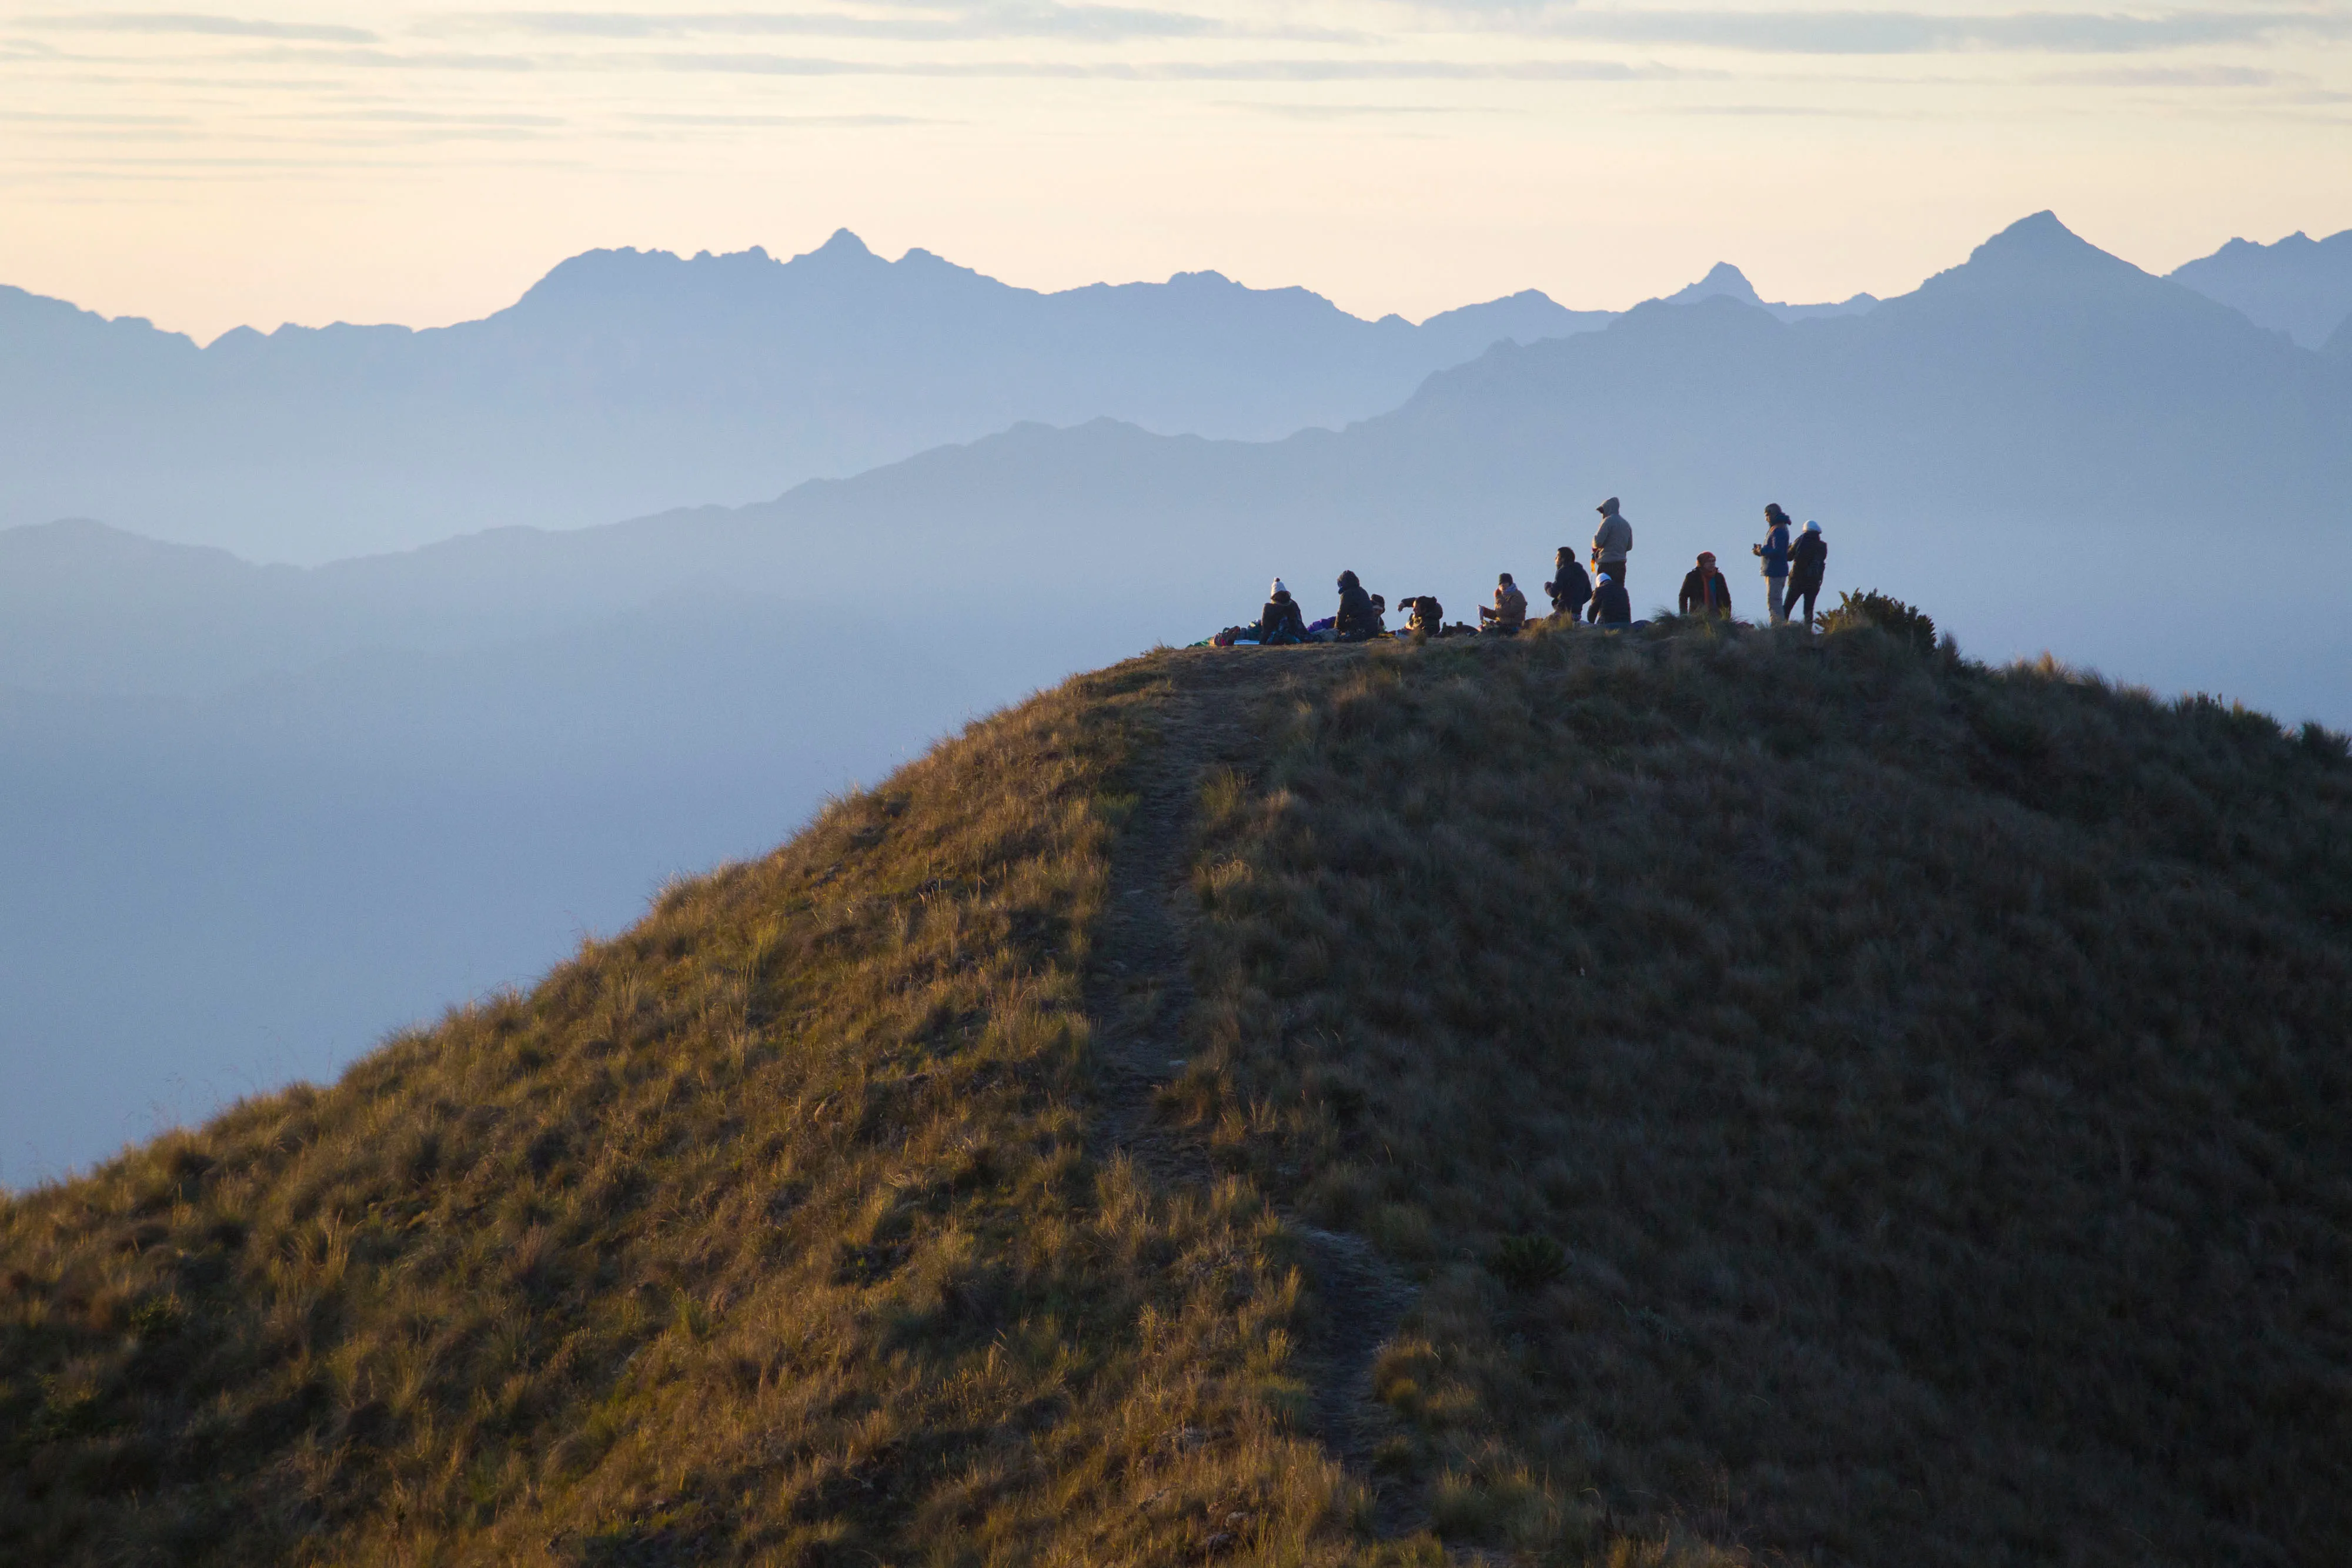 A grassy mountain peak with a group of people standing on top of it, and more hazy mountains in the distance